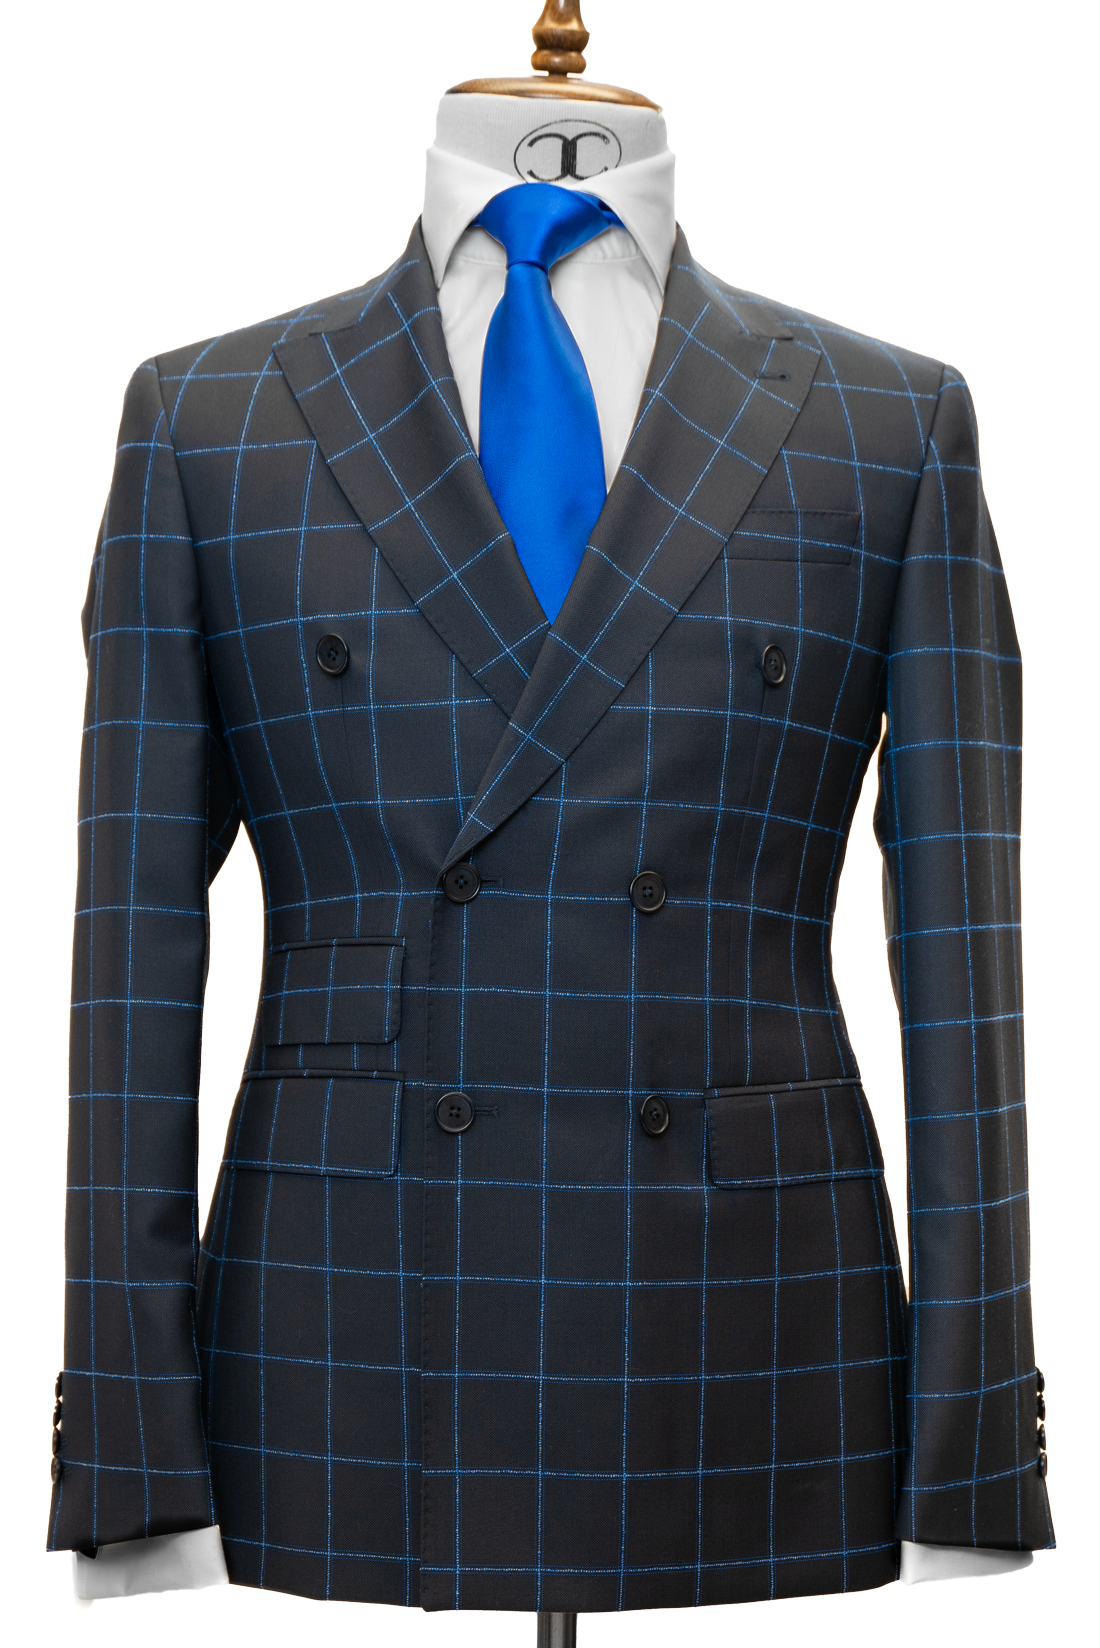 Vitale Barberis - Navy blue with royal blue plaid double breasted slim fit suit